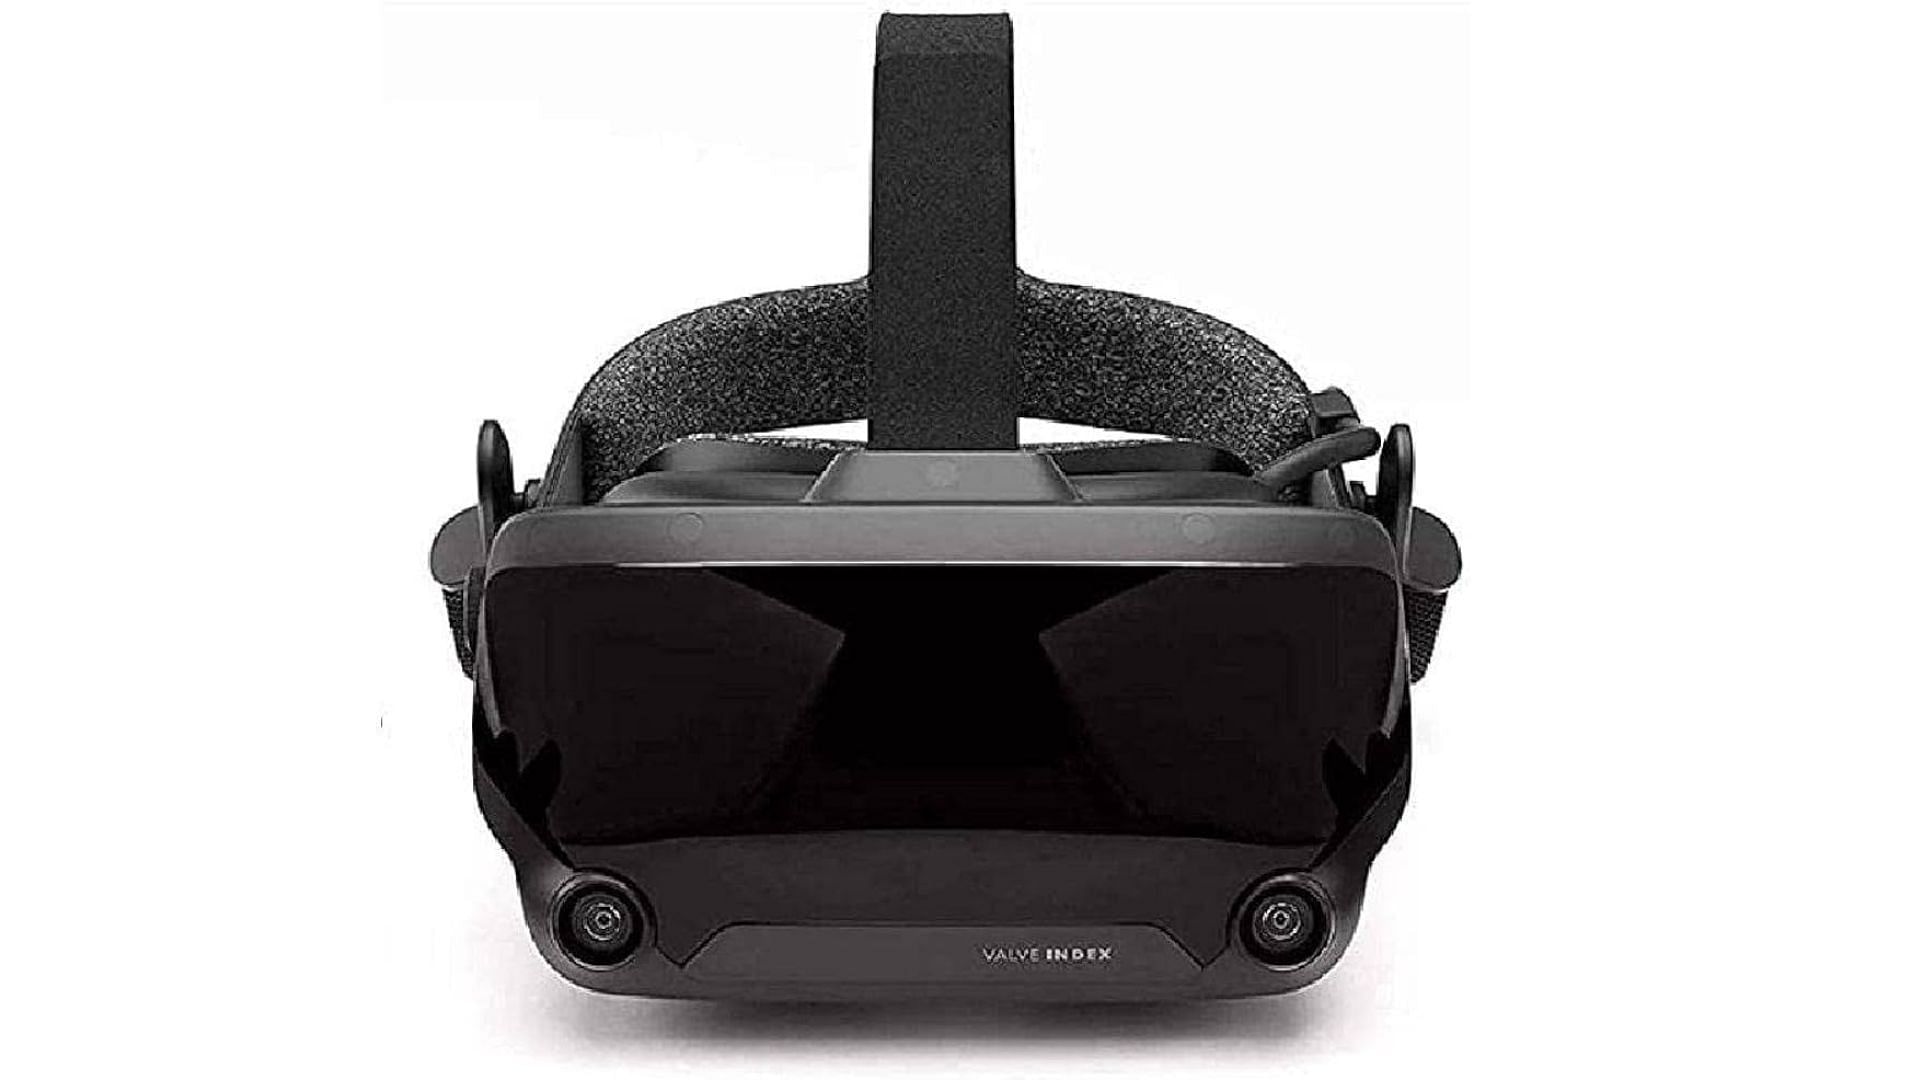 One of the most expensive VR headsets (Image via usbnovel/Amazon)